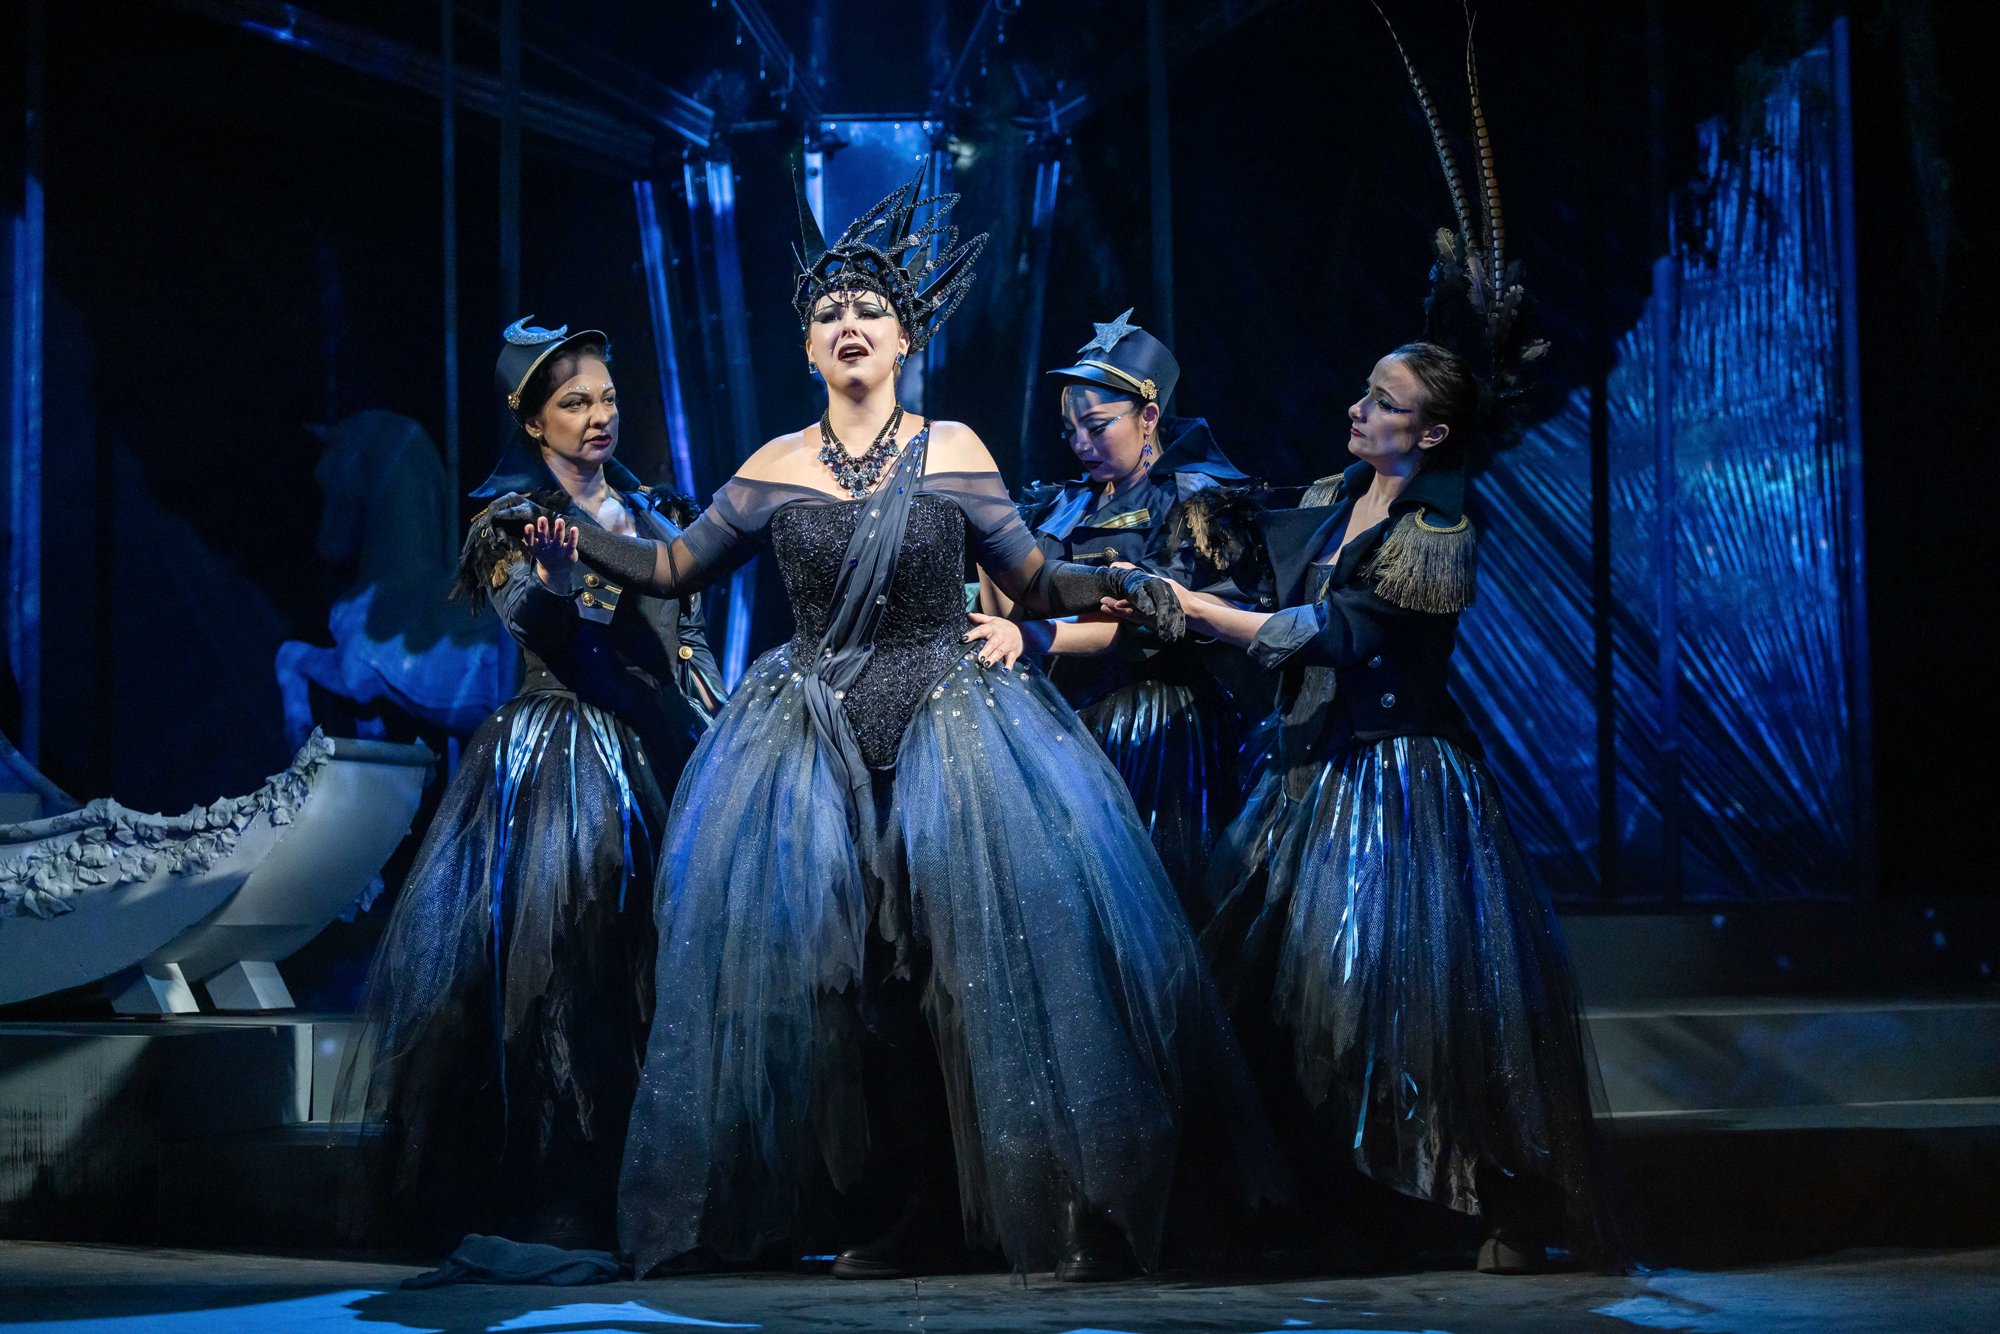 THE MAGIC FLUTE is a sign of several debuts